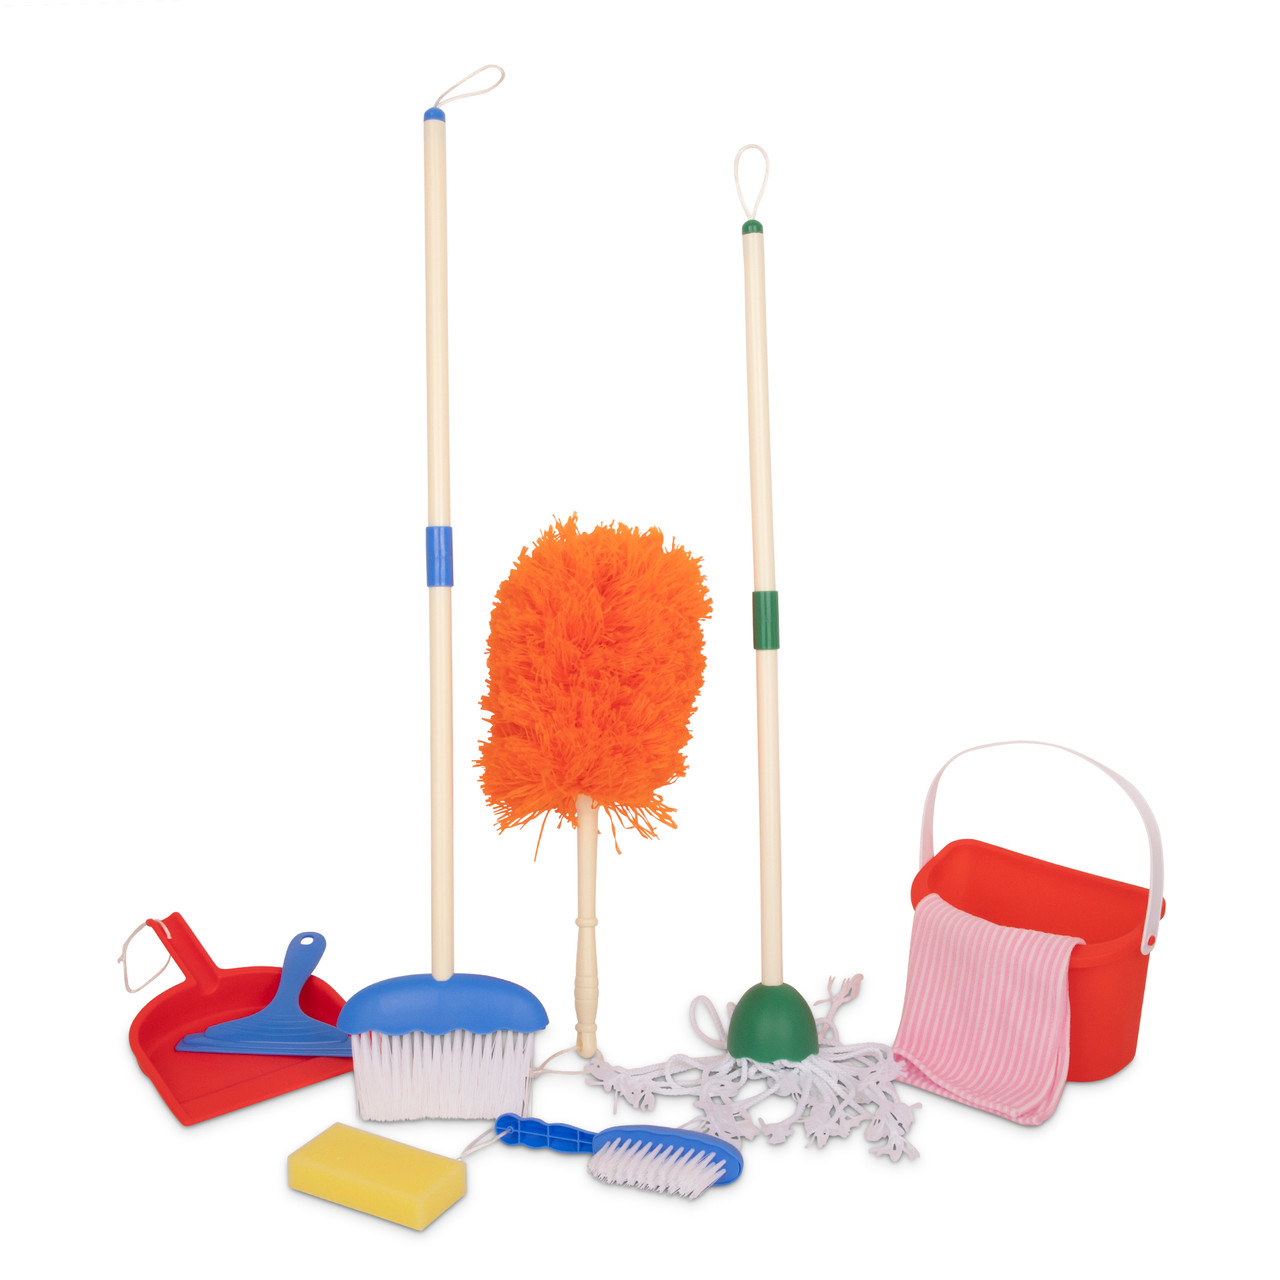 6Pcs Kids Cleaning Set Children's Realistic Play House Toy Broom Mop Duster  Dustpan Brushes for Housekeeping Educational